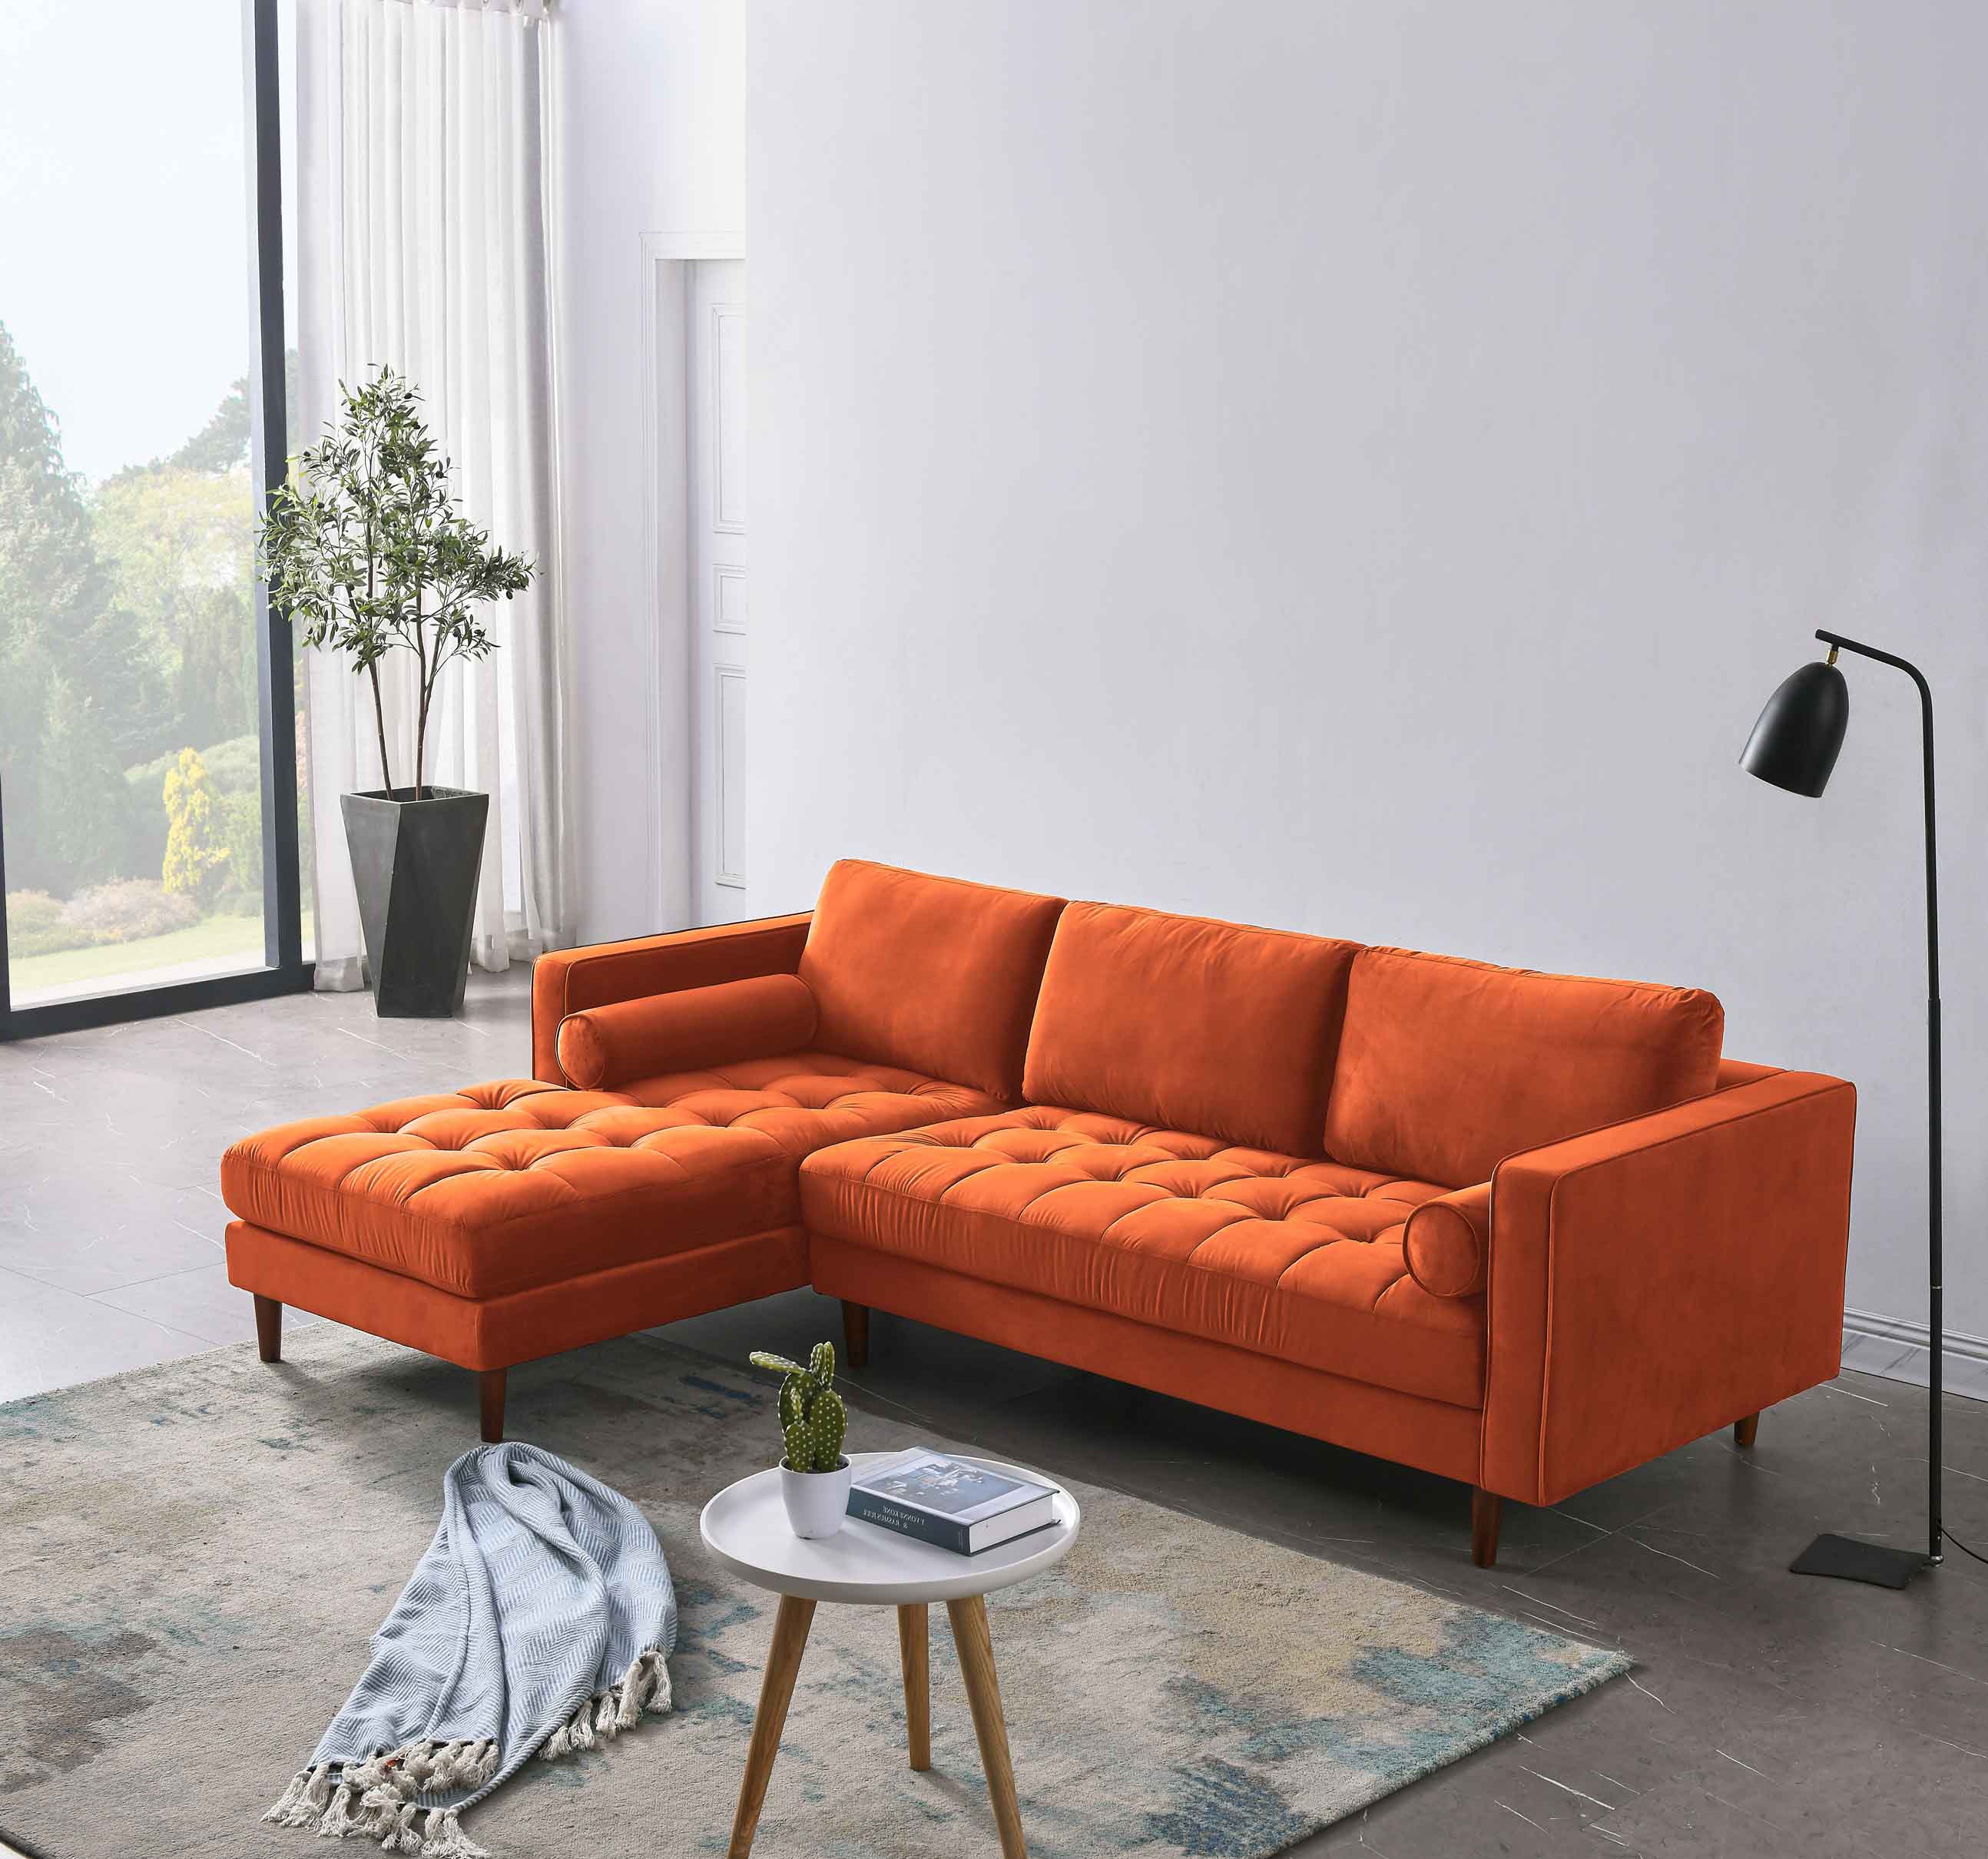 What Is A Standard Sofa Size